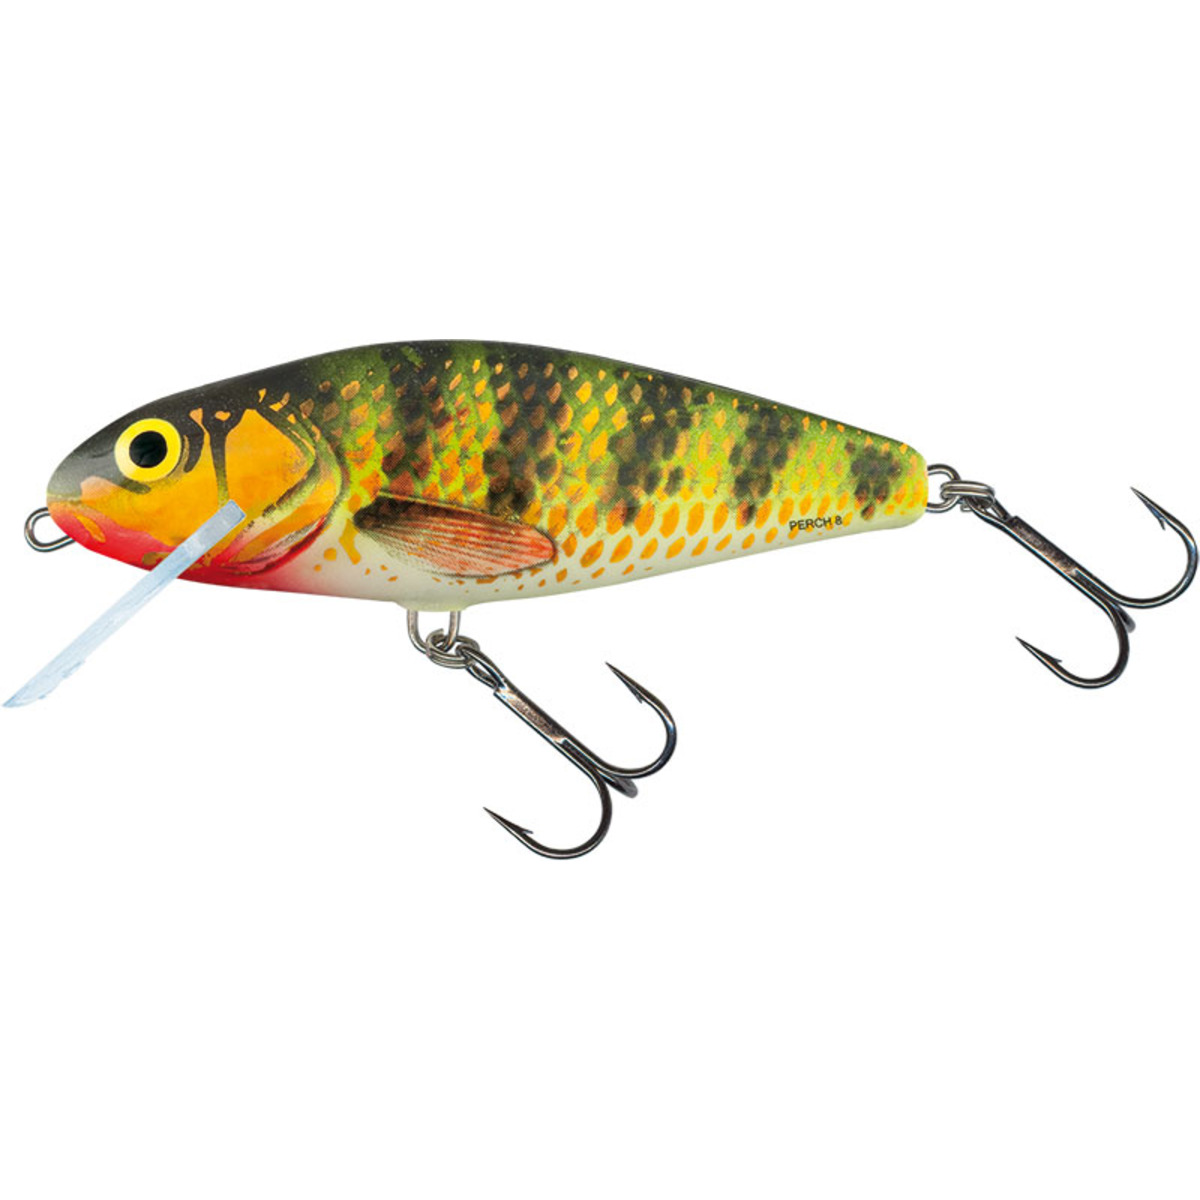 Salmo Perch Shallow Runner - 14 Cm - Holographic Perch